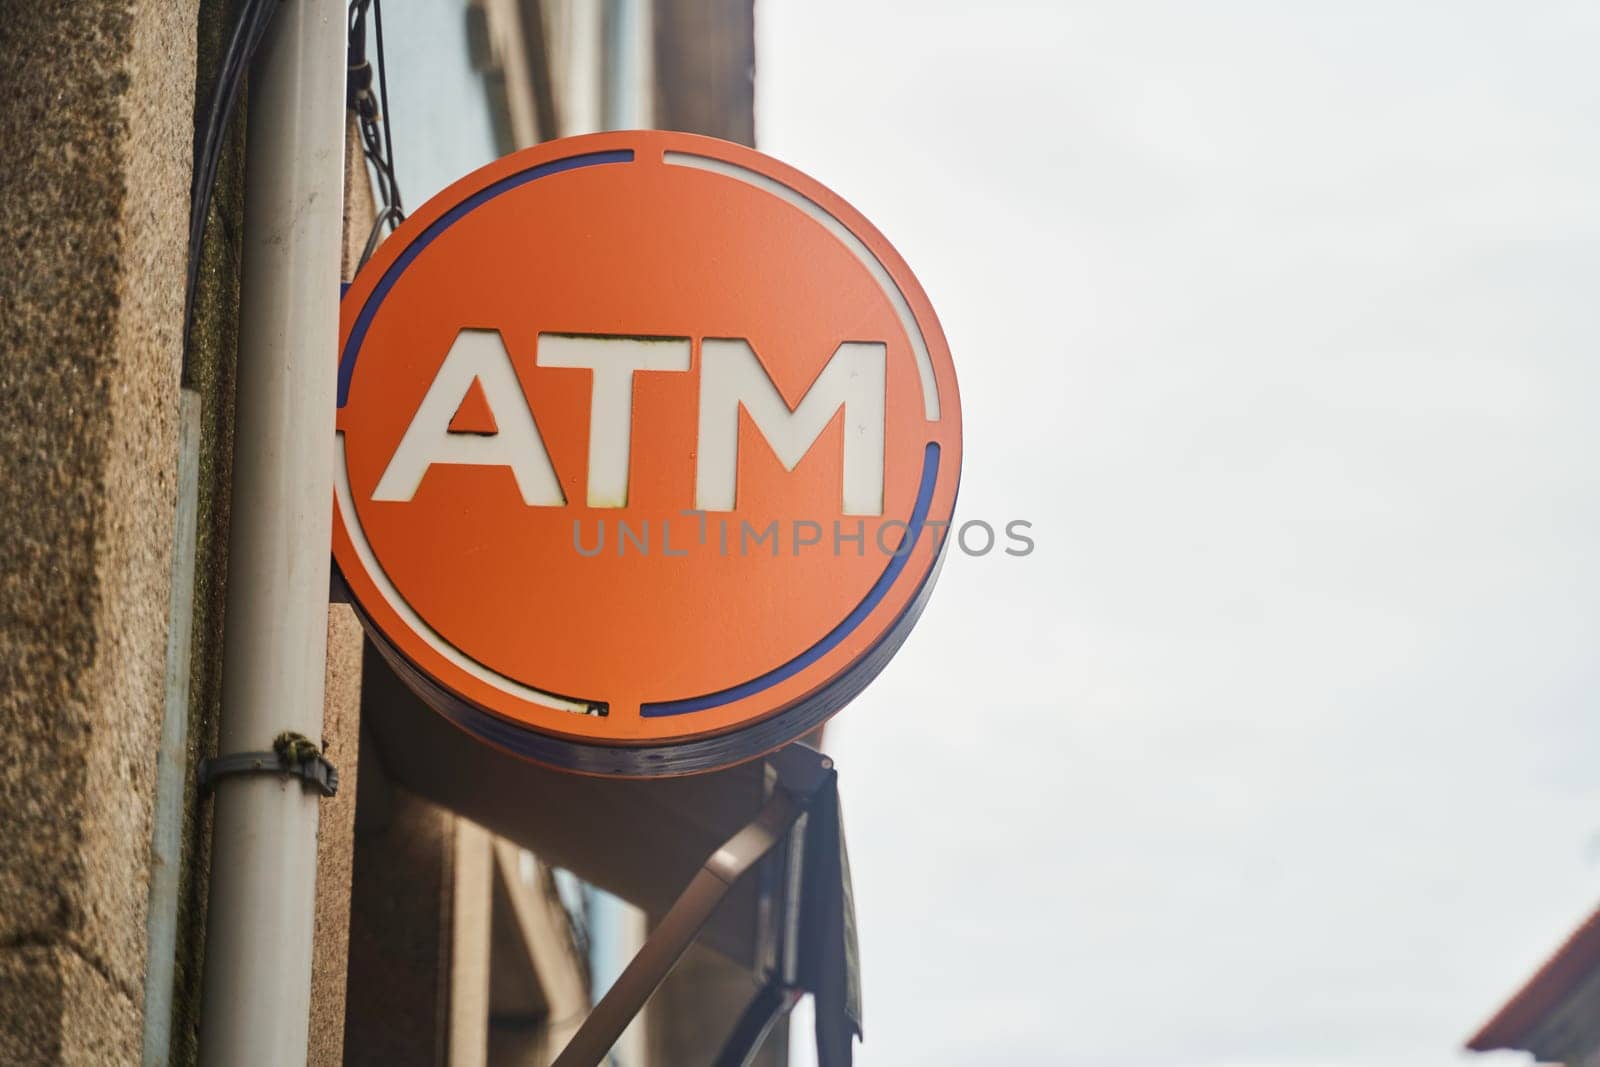 An orange ATM sign with a sky blue logo and metal cylinder on the side of a building. The signage uses a bold font and is in the shape of a circle